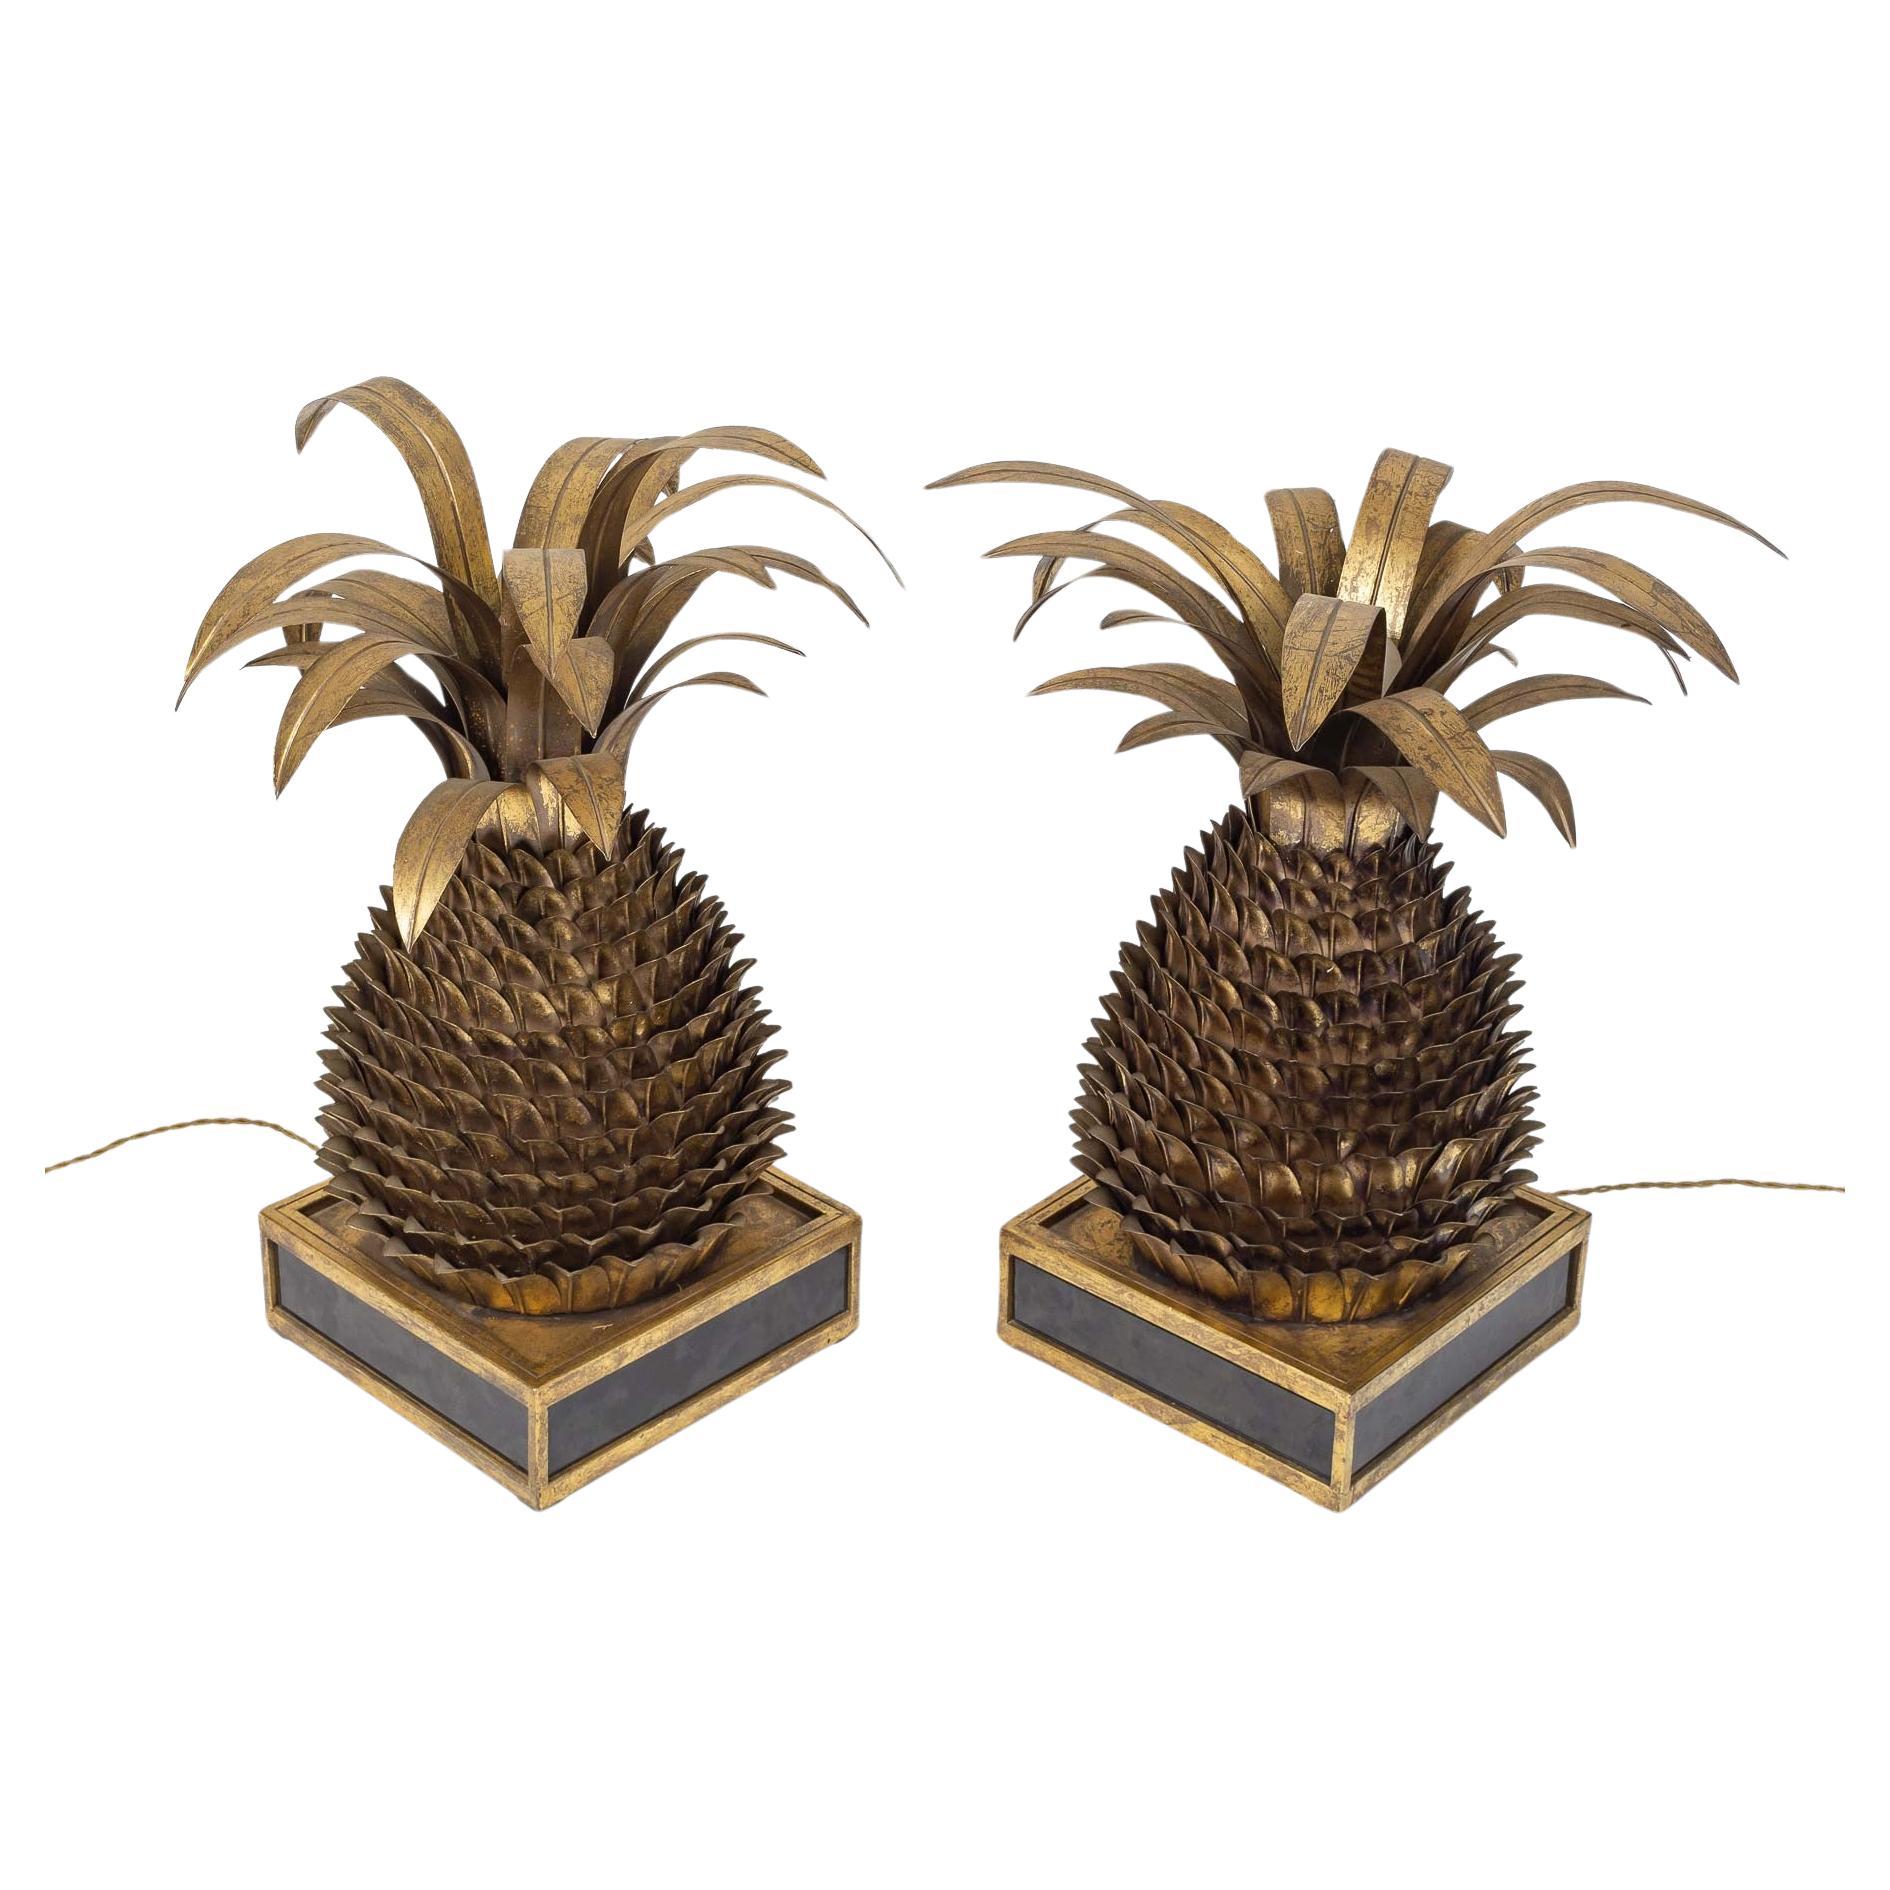 Impressive Pair of Table Lamps “Ananas”, Attributed to Maison Jansen, France, ca 1970
Pineapple brass table pair of lamps from the 1960/70s in France attributed to Maison Jansen. 
Artfully made of brass, this elaborate worked model of table lamp is